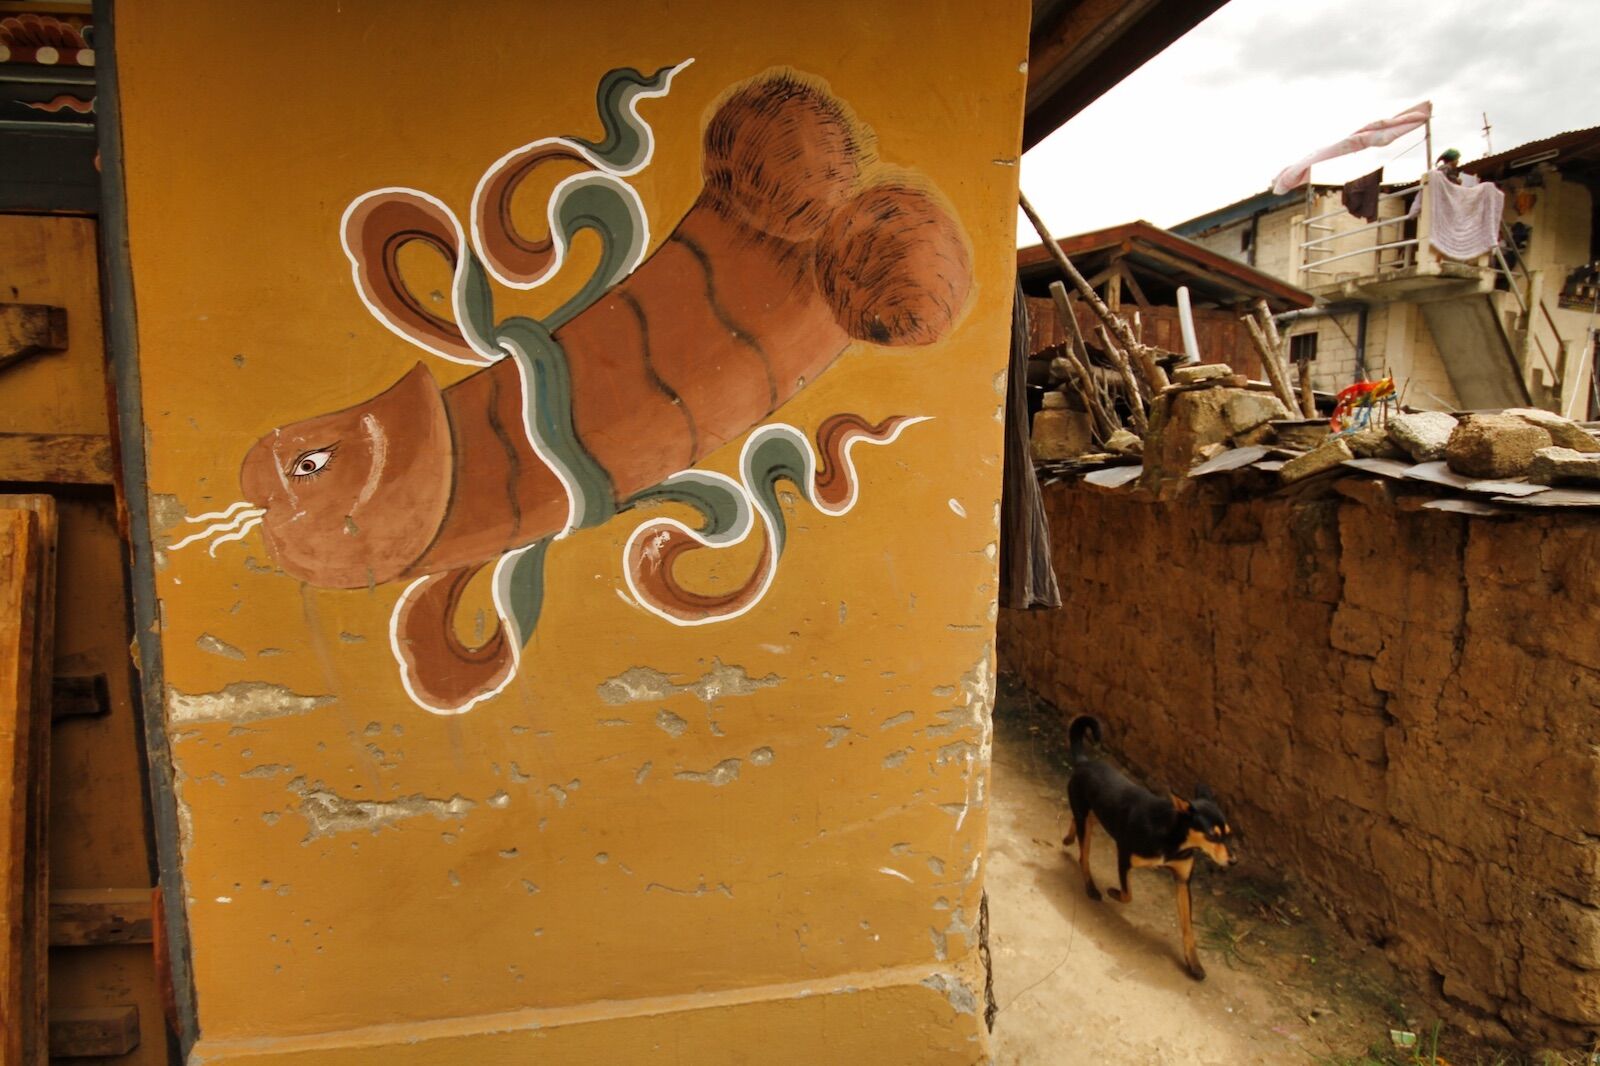 A painting of a penis in Bhutan on a house. The penis has eyes, hair, and is blowing a white substance from its mouth.